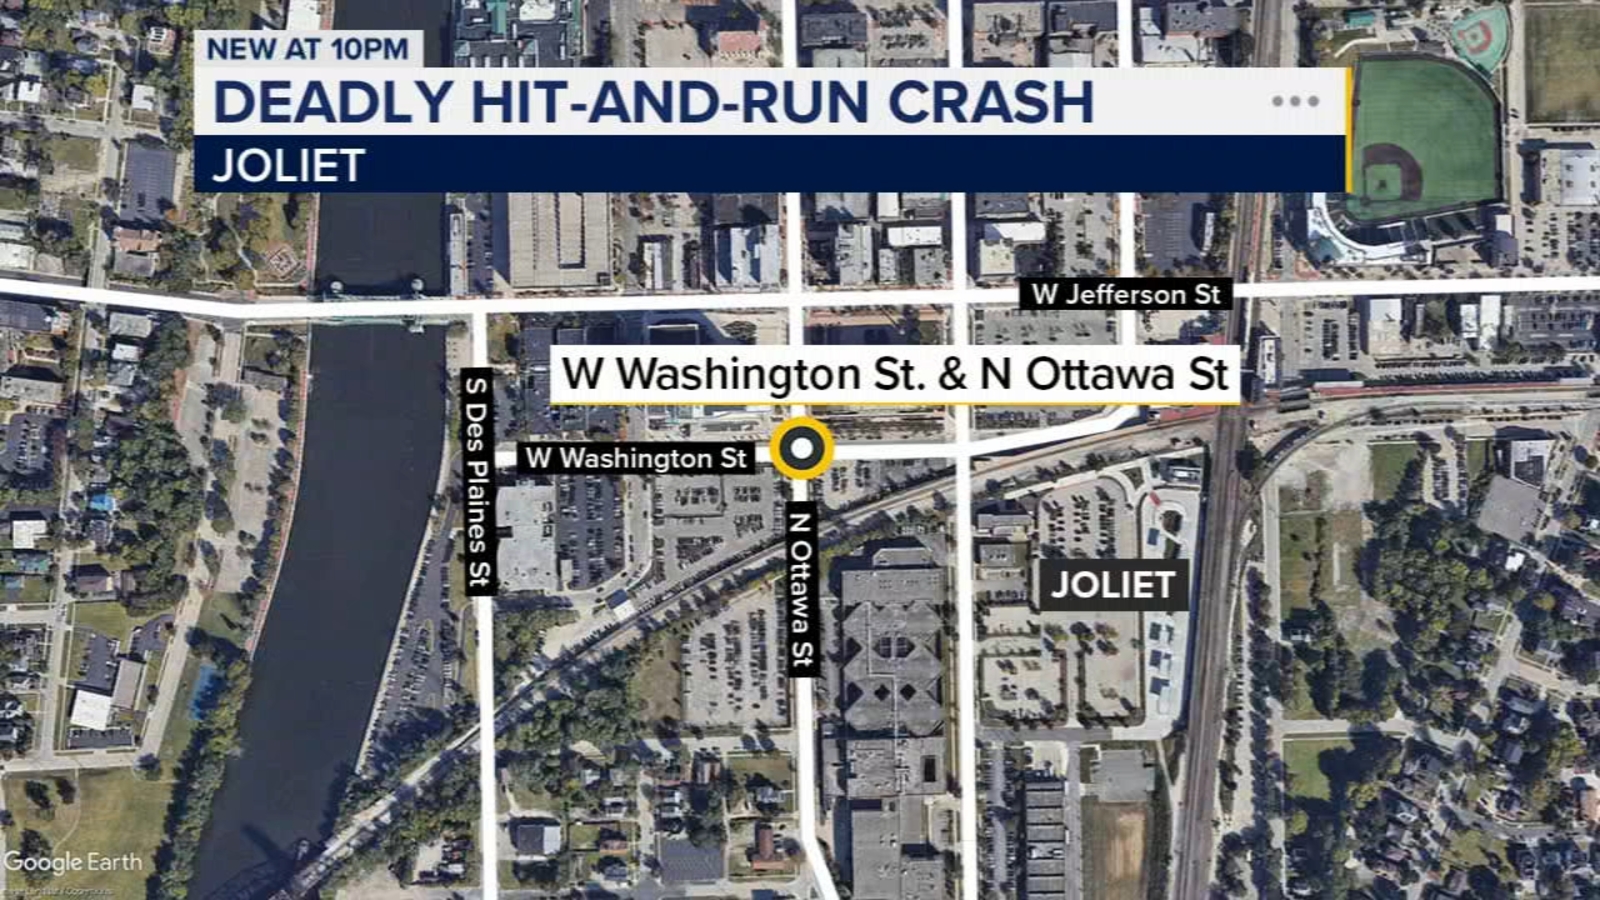 Joliet crash: Man, 21, hit by semi, killed near Washington, Ottawa streets after he was released from Will County jail, police say [Video]